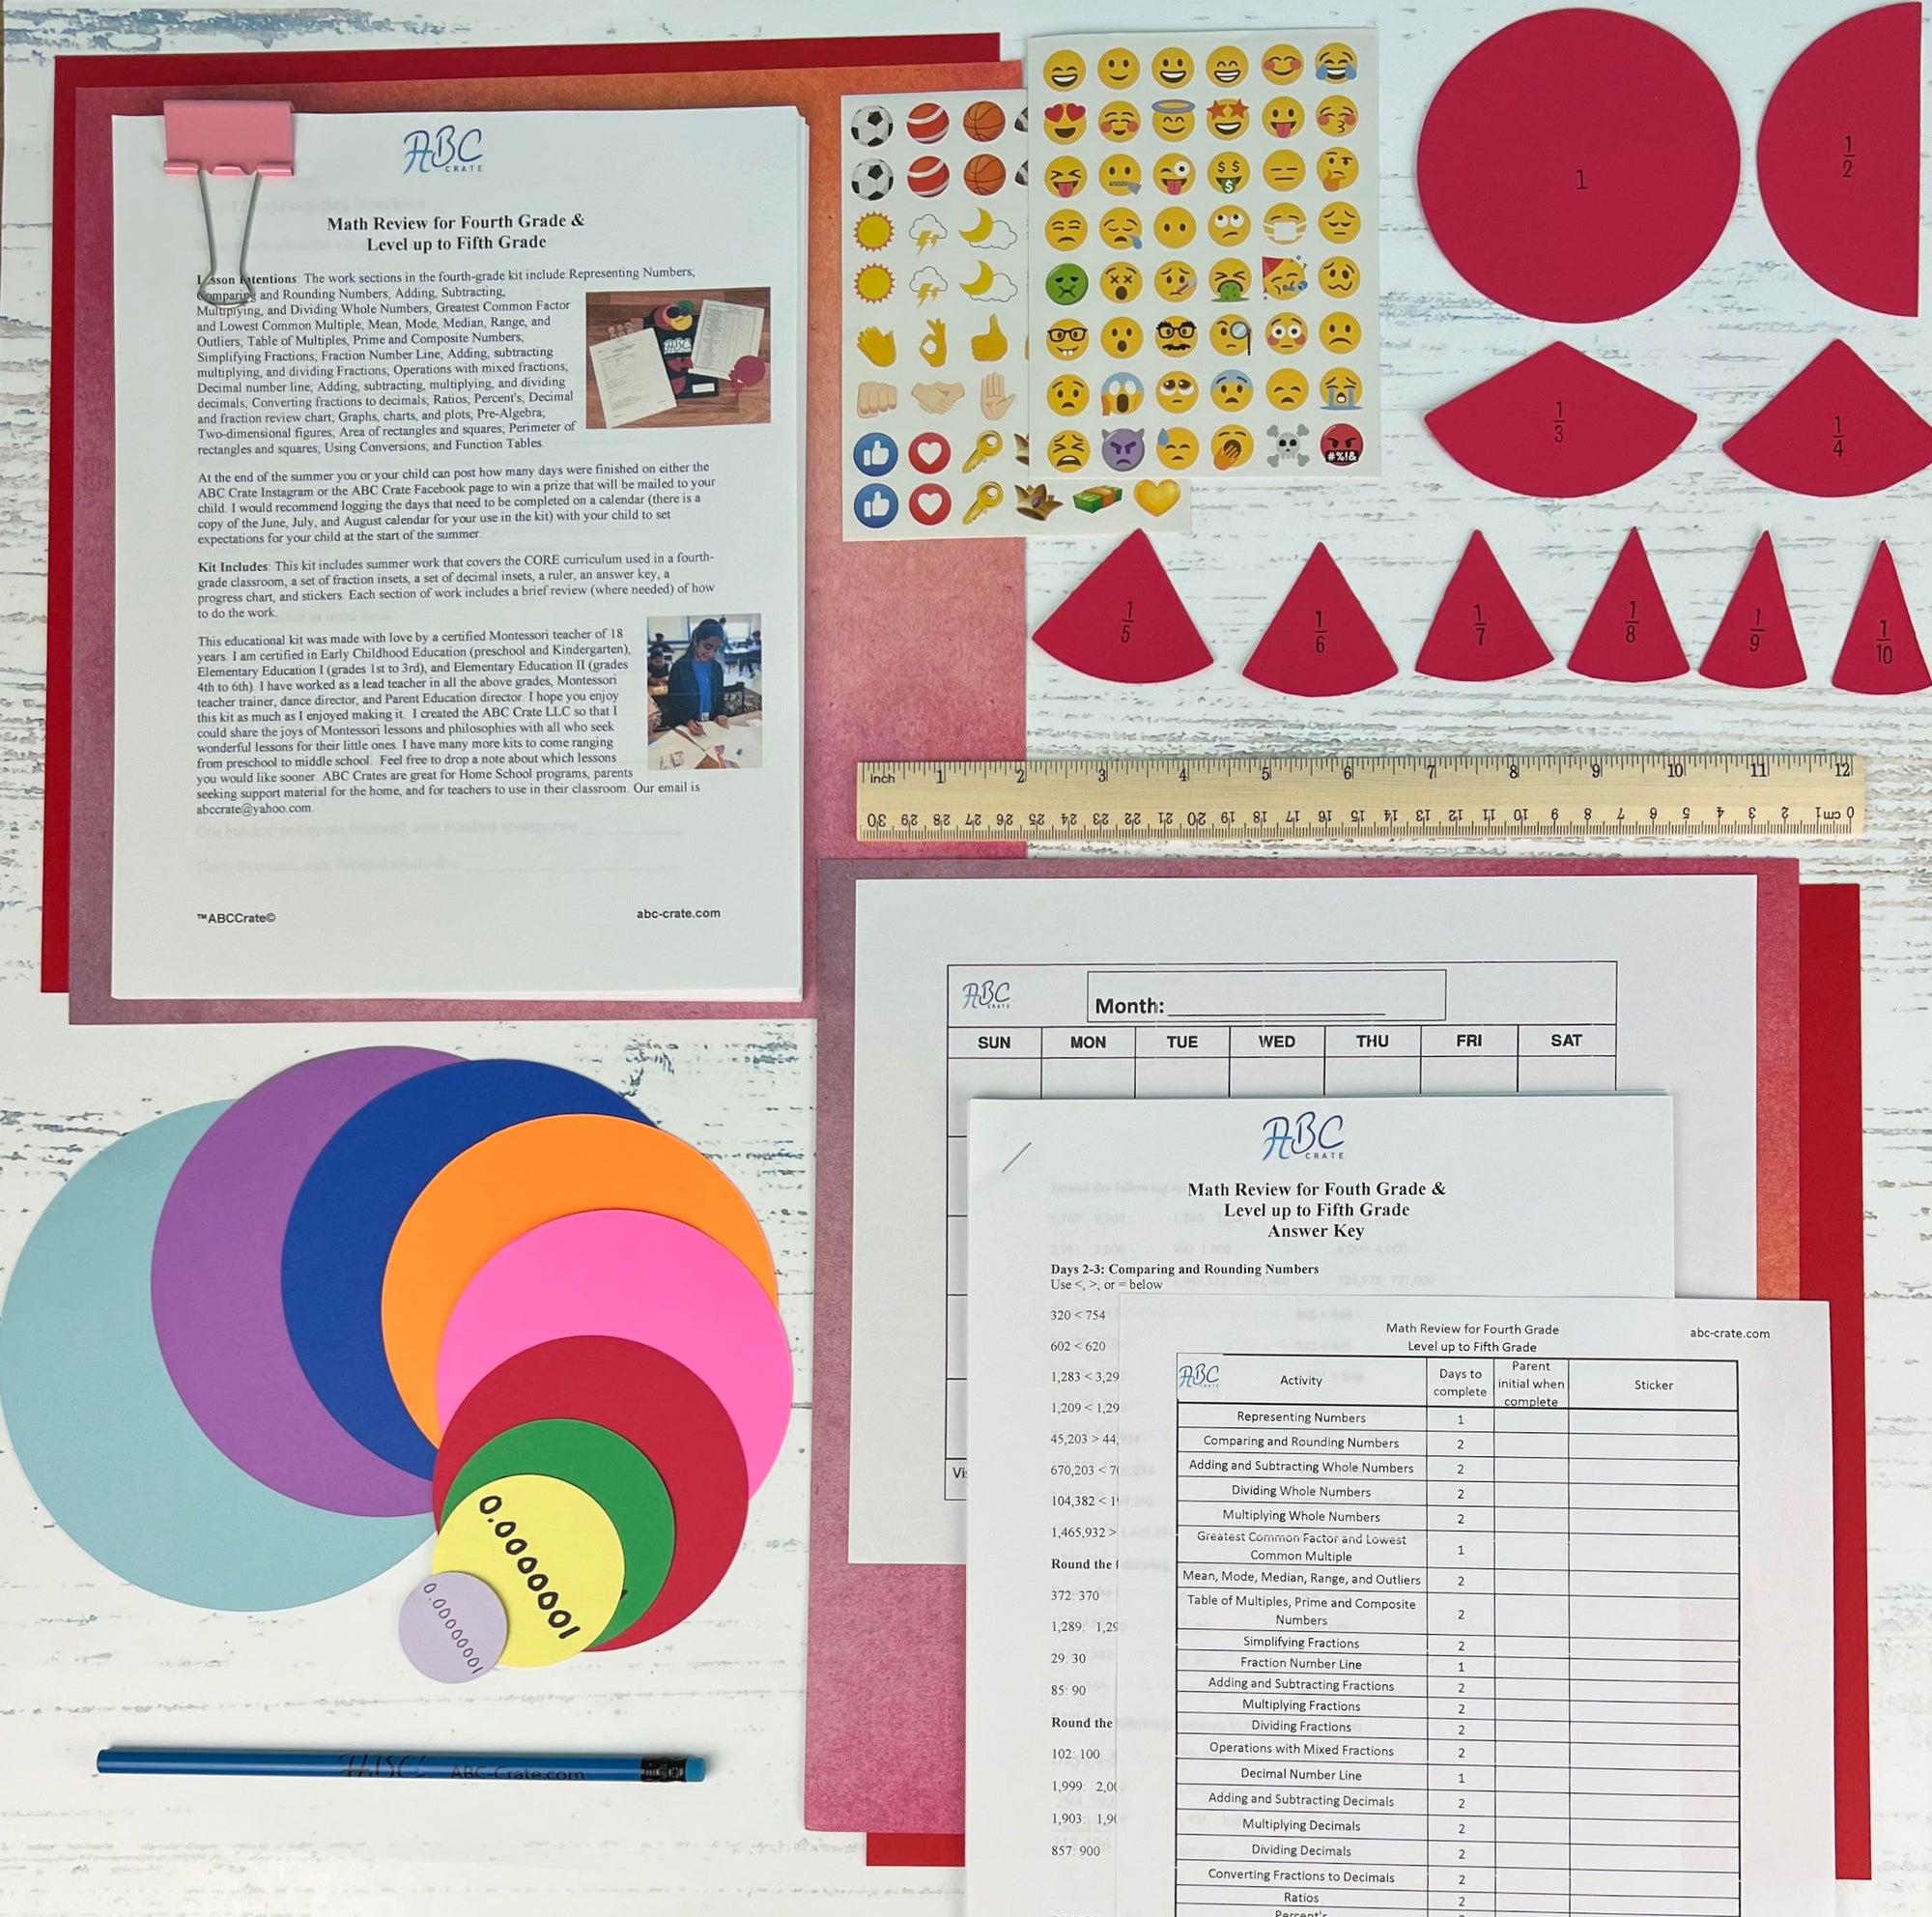 Fourth Grade Review and Level Up to Fifth Grade Kit